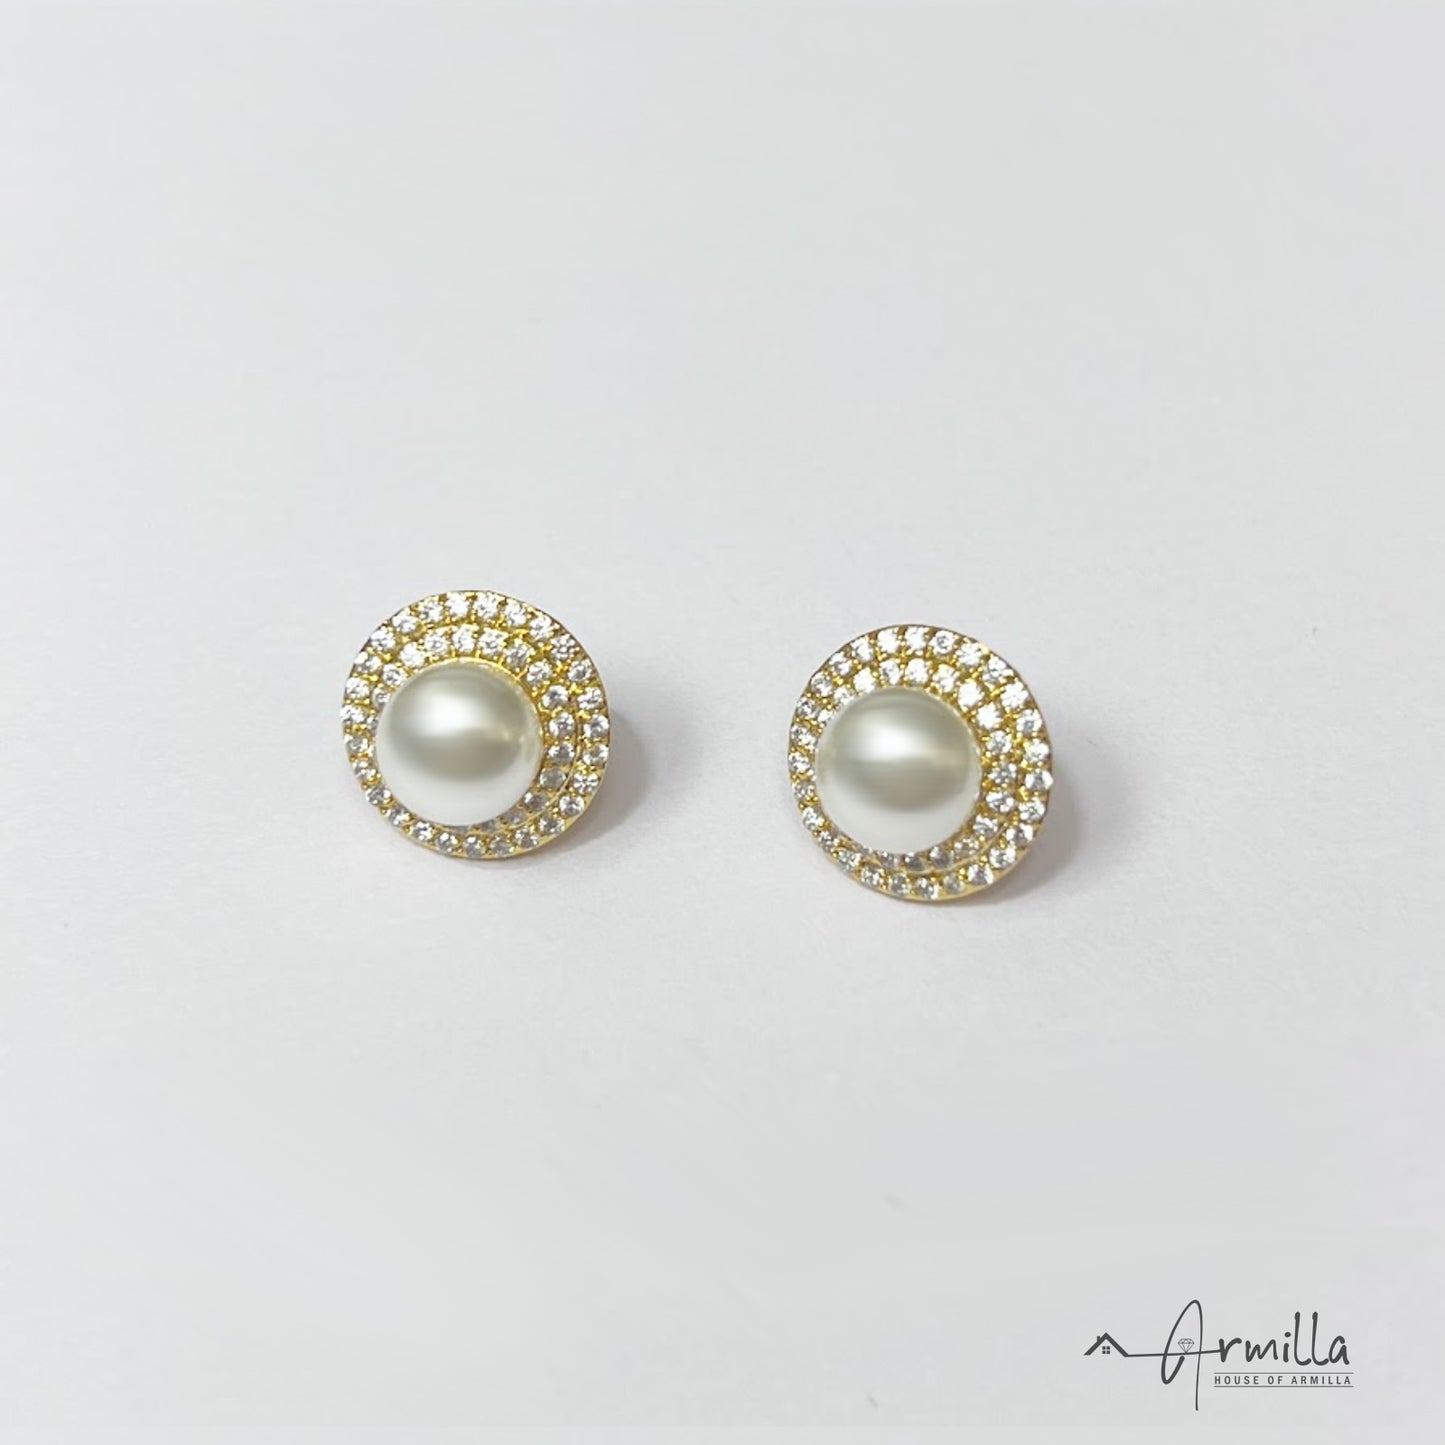 White Pearl Stud Earrings with Gold Toned Border